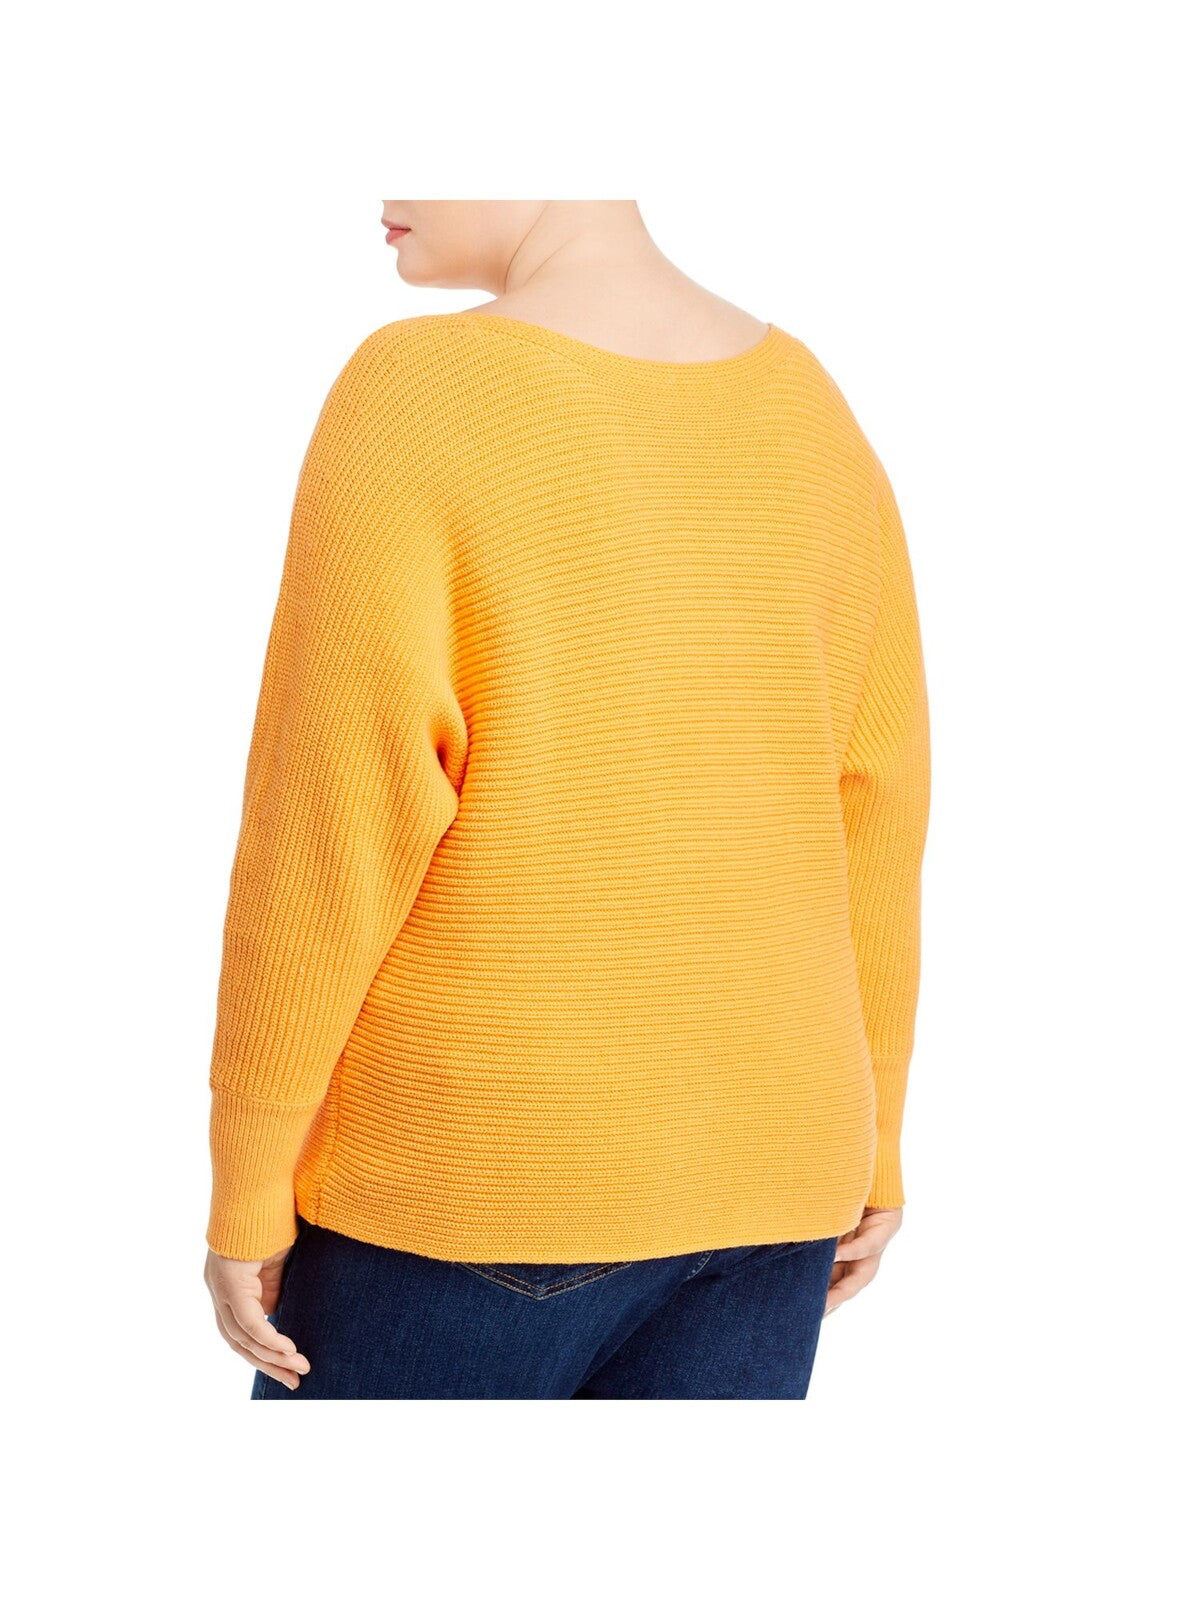 AQUA CURVE Womens Orange Cotton Blend Ribbed Knit Pull-over Dolman Sleeve Round Neck Wear To Work Sweater Plus 3X